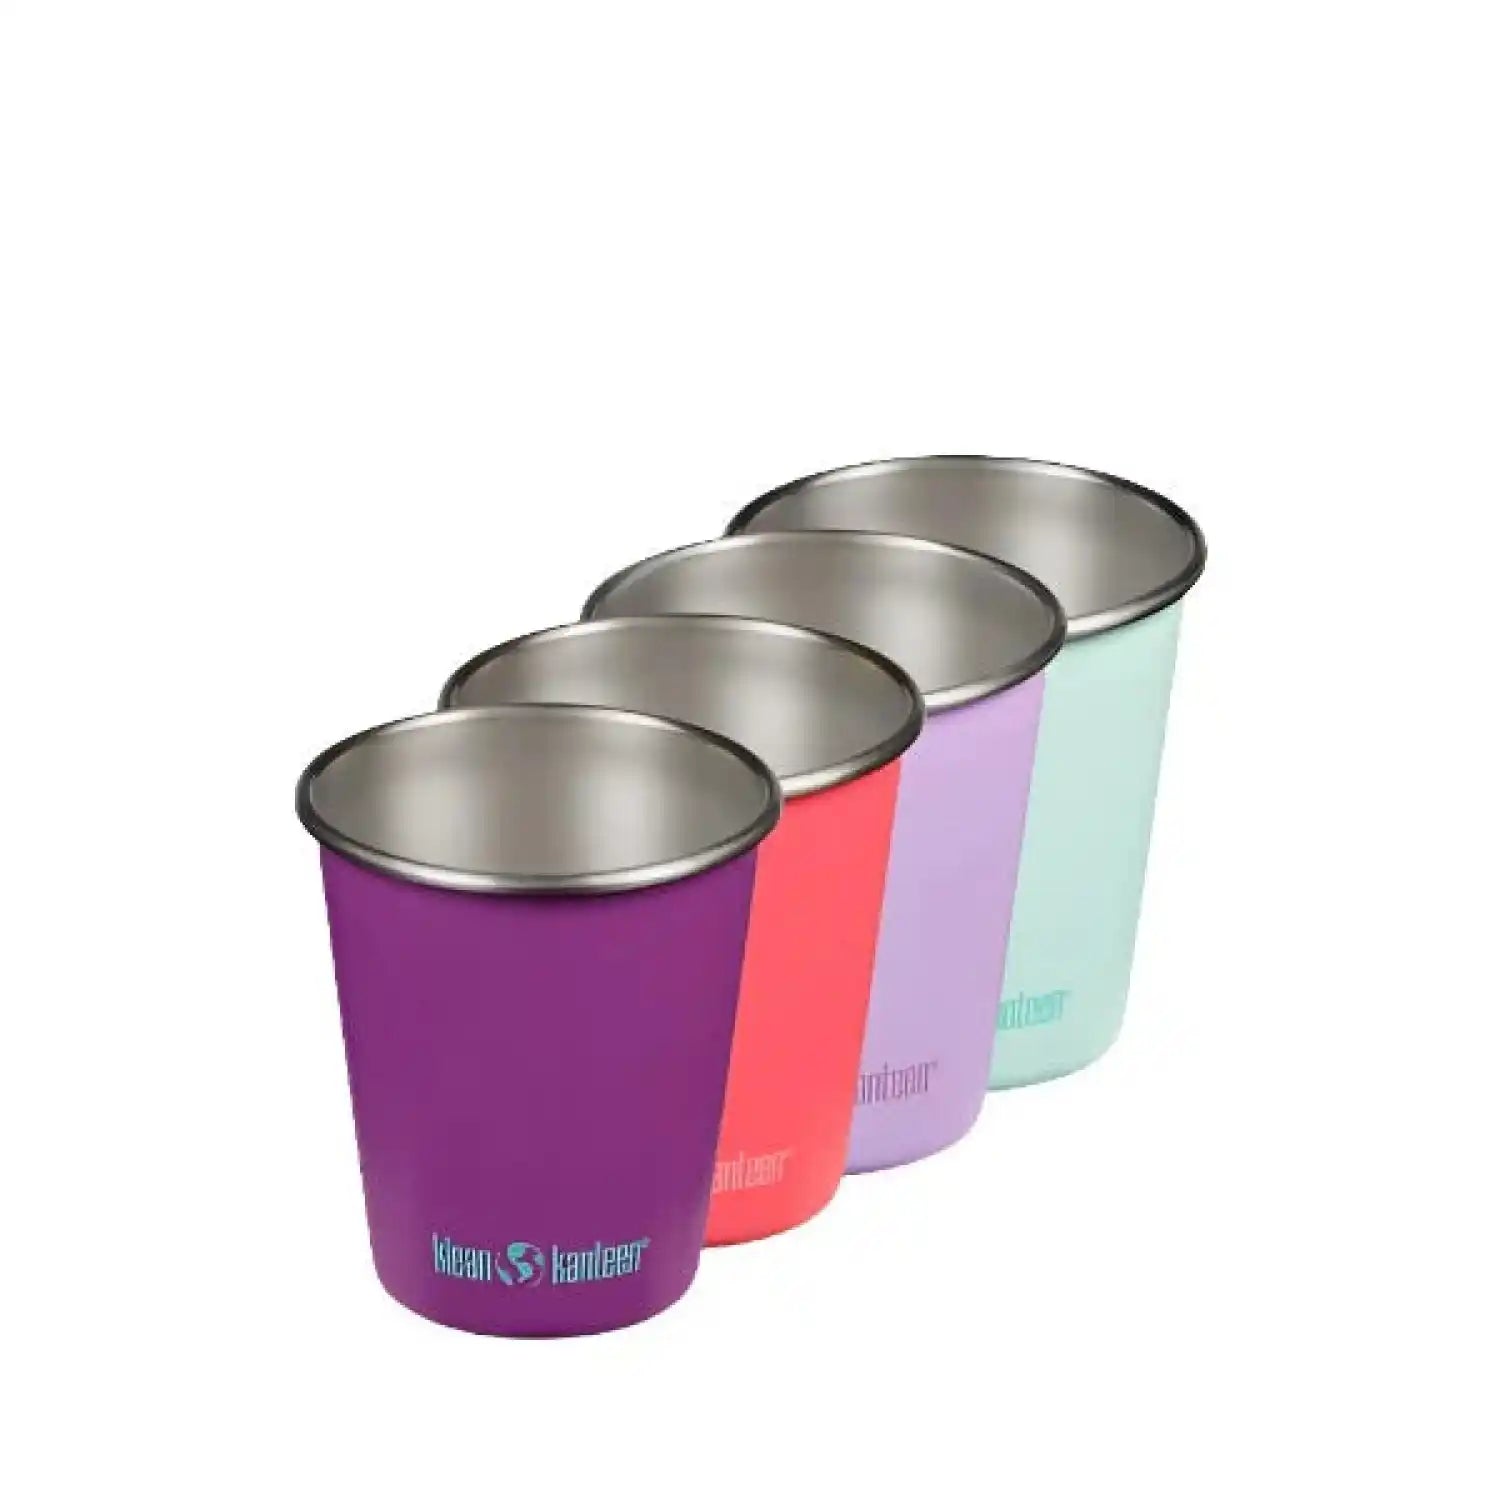 Klean Kanteen 10 oz Cup - 4 Pack, Butterflies, view of 4 cups in a row 